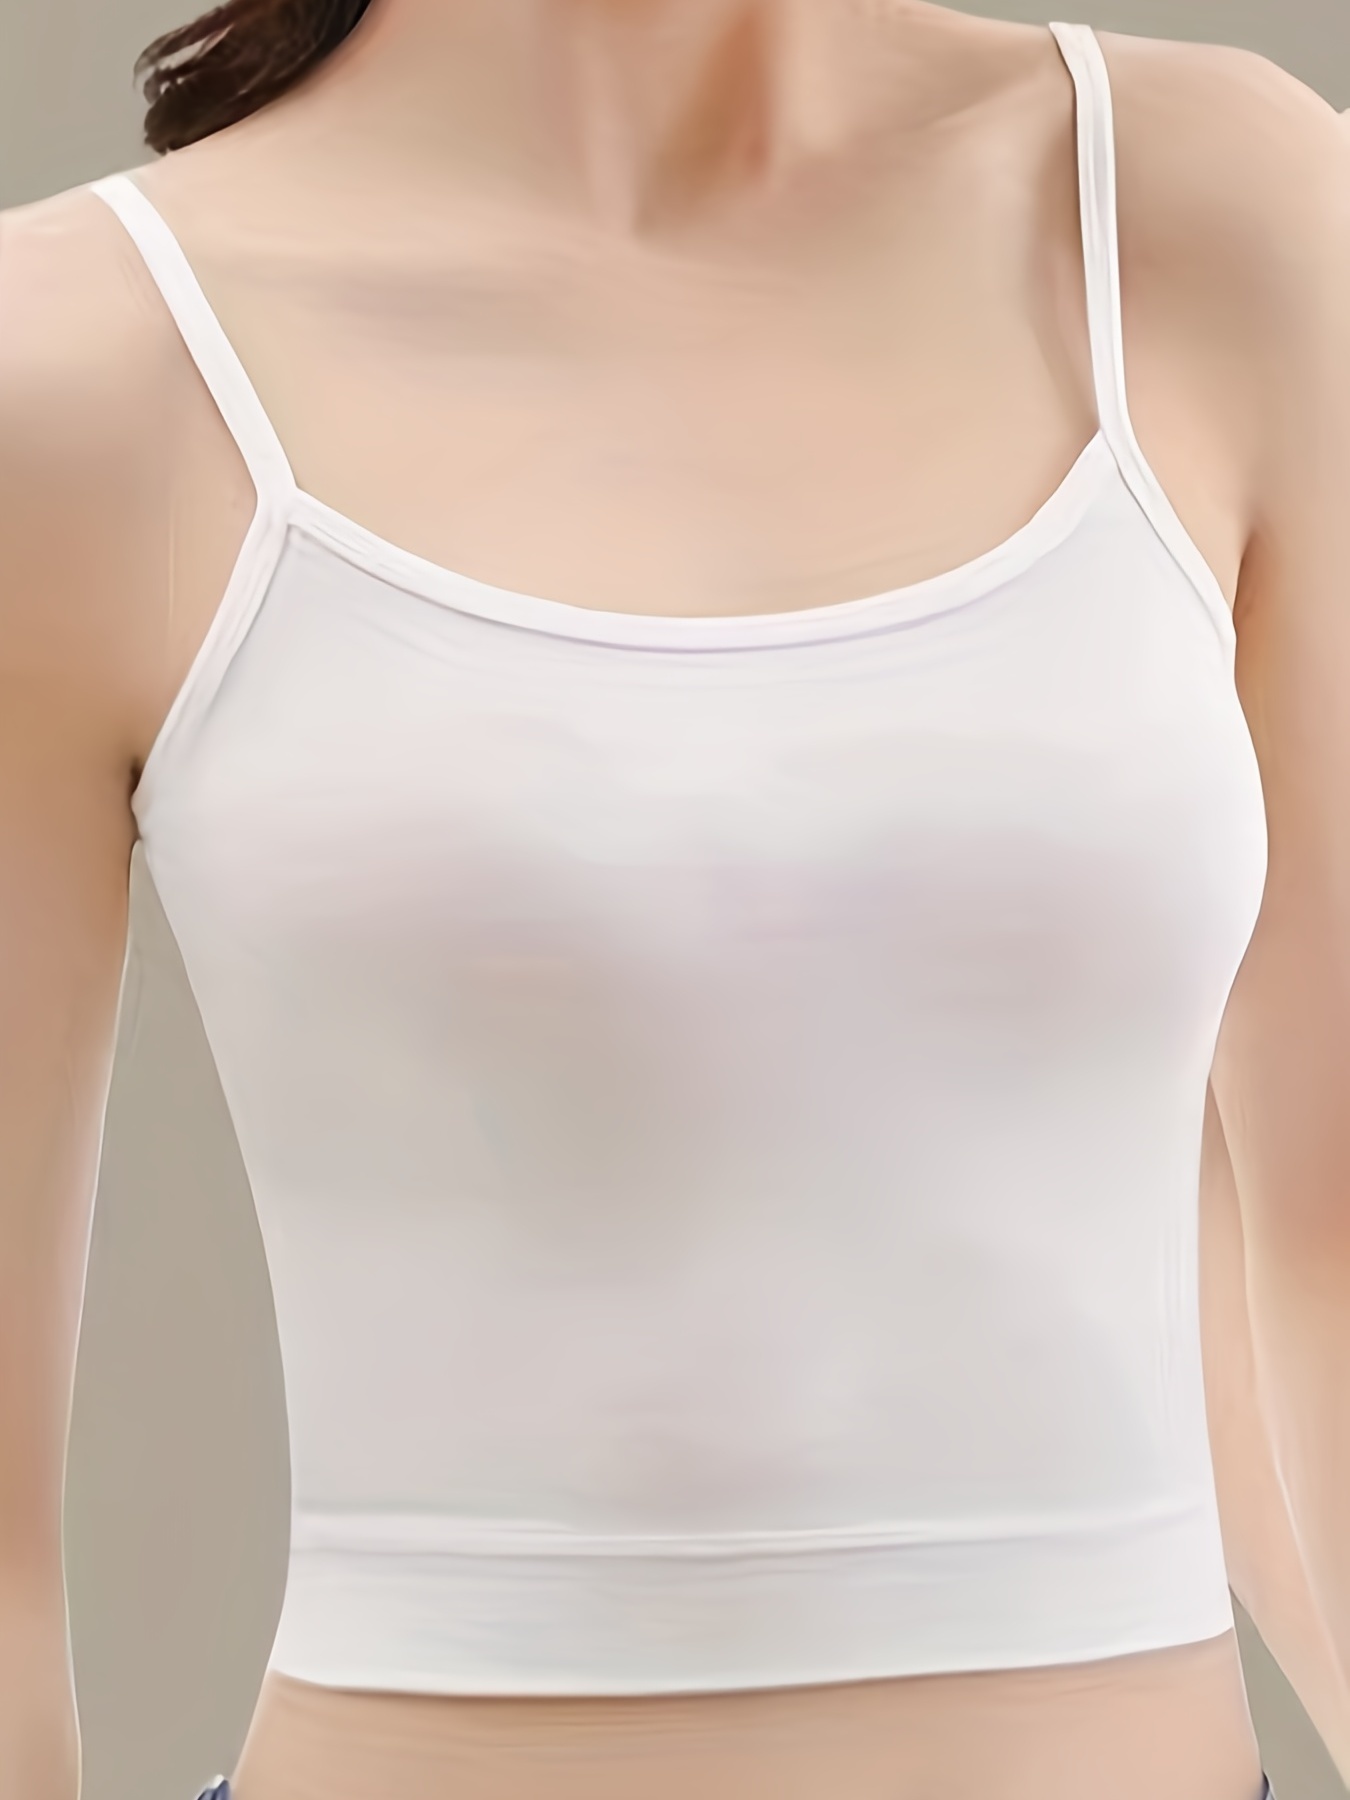 Solid Front Buckle Sports Bras Breathable Rimless Adjustment